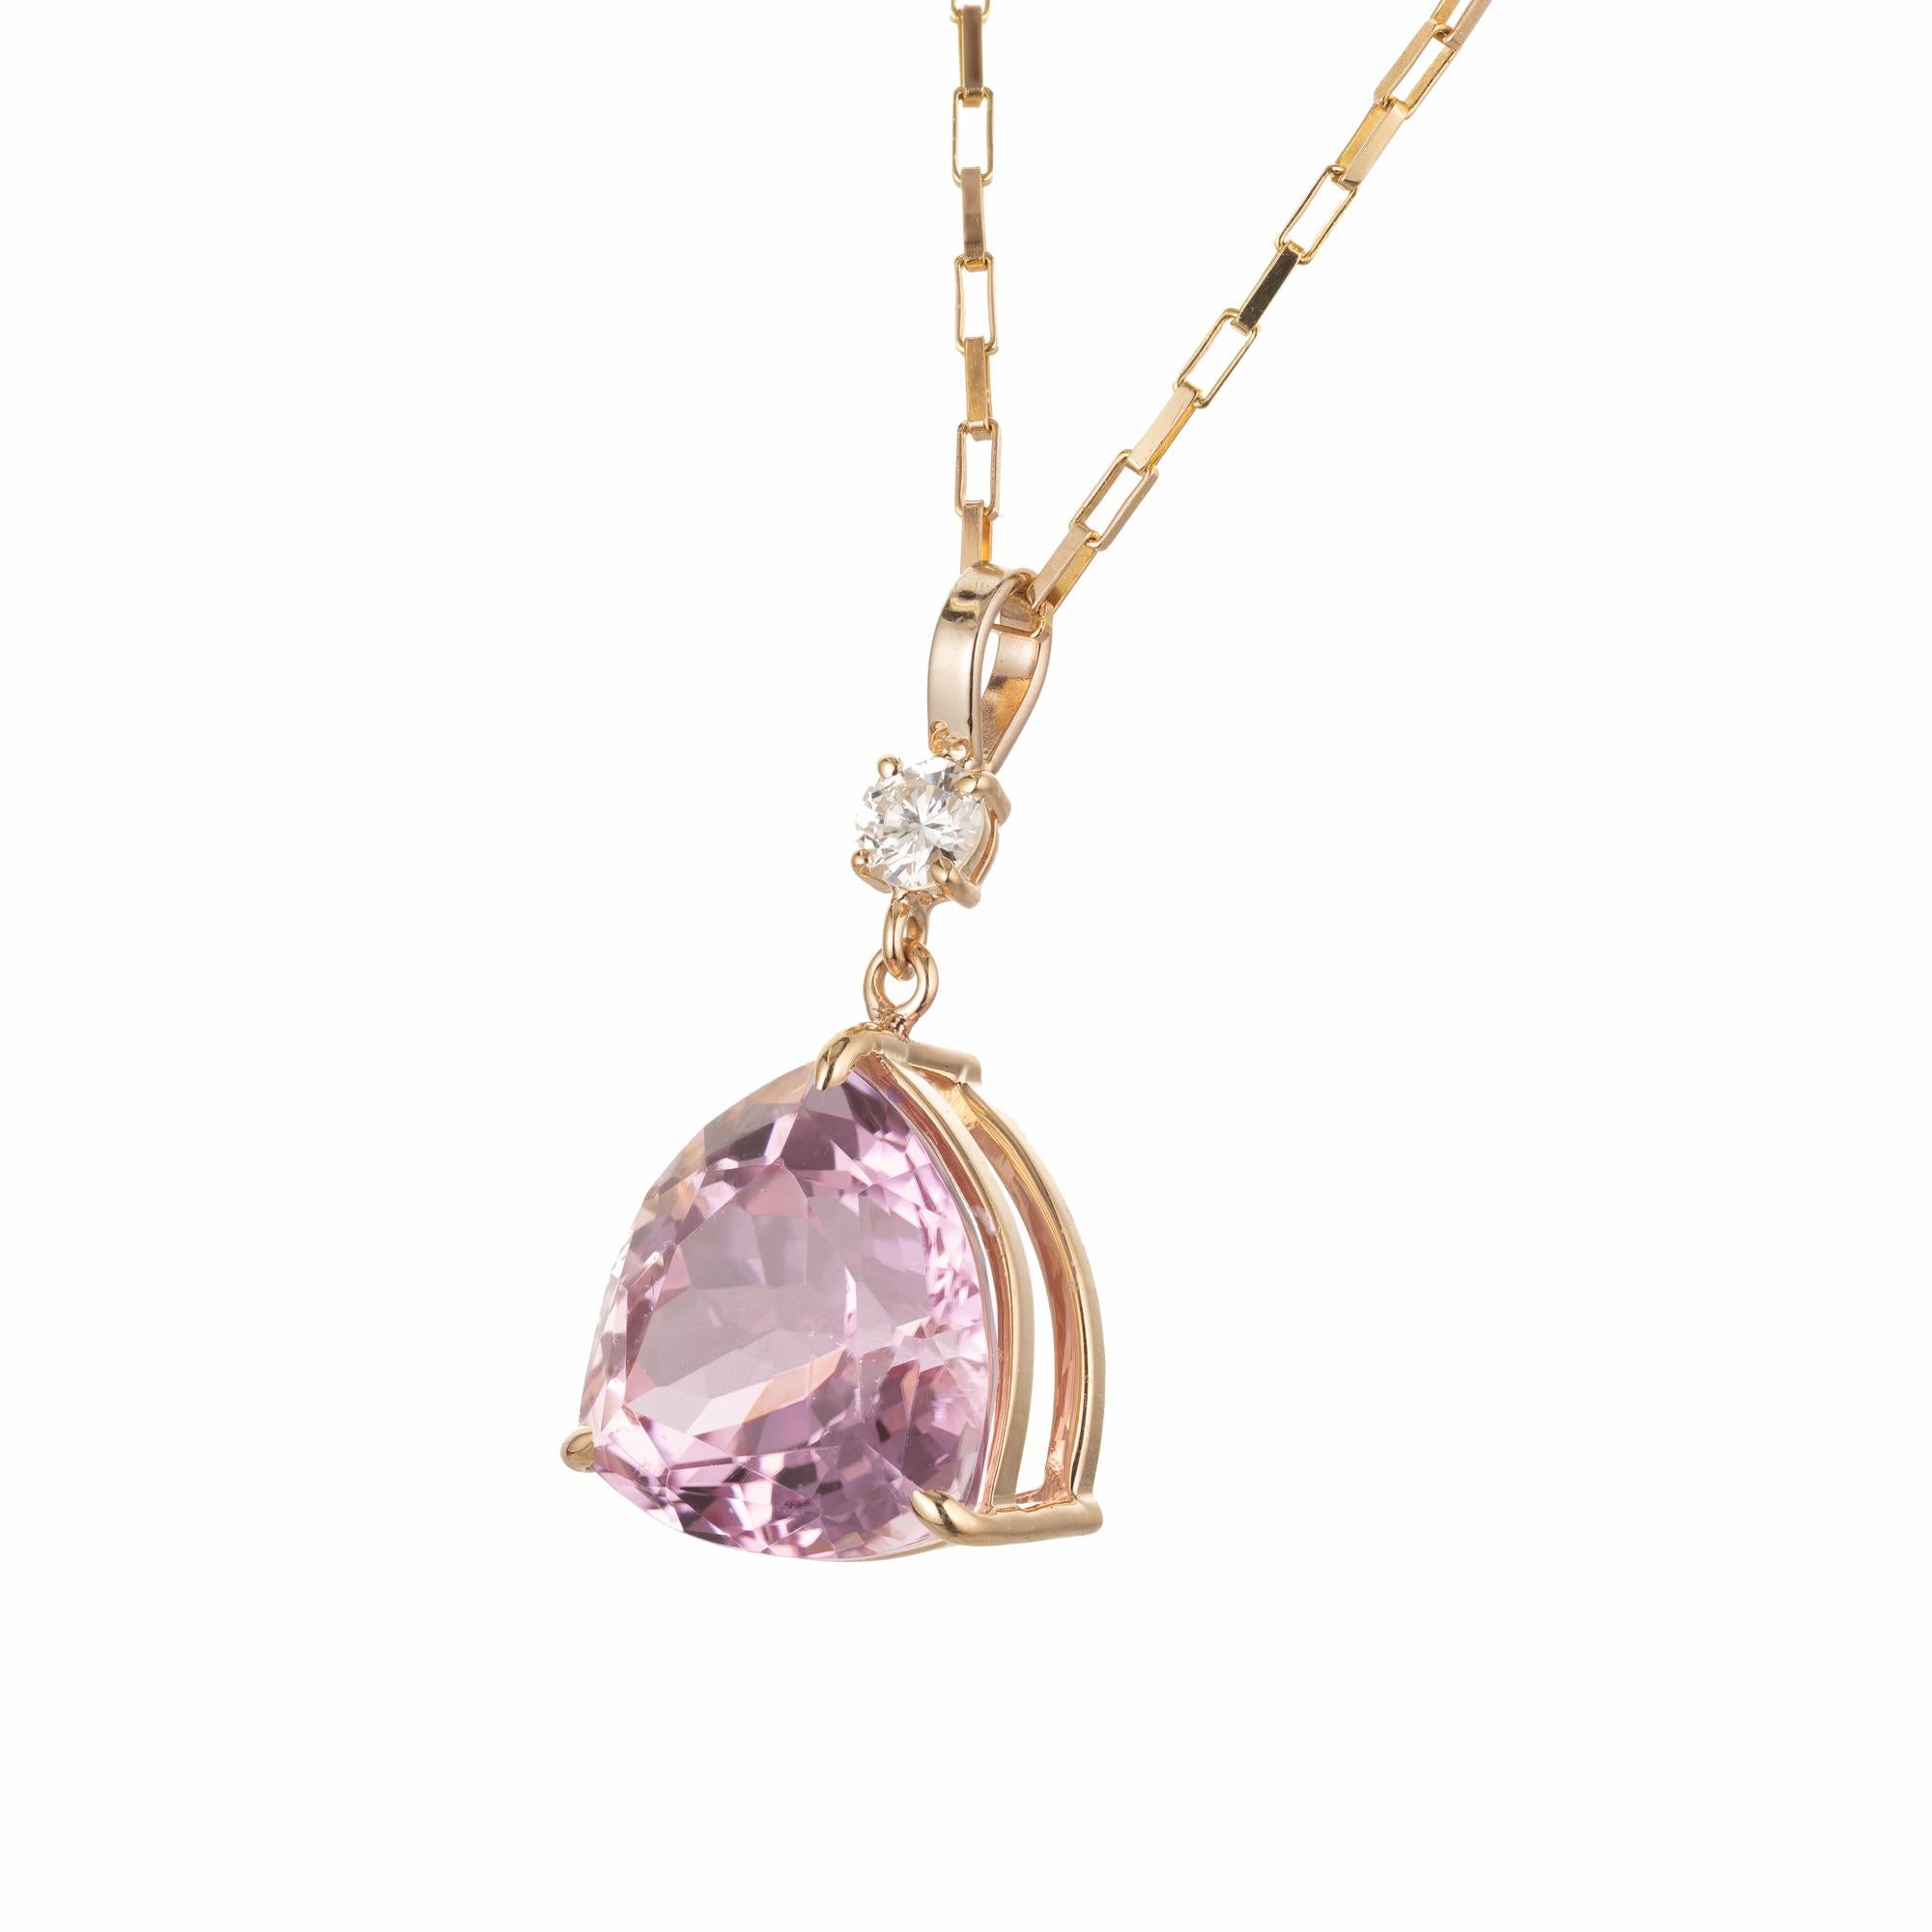 Peter Suchy 10.96 carat bright pink kunzite with a round brilliant cut diamond accent on a 18 inch yellow gold chain. Designed and crafted in the Peter Suchy Workshop. 

1 triangular cushion pink VS Kunzite, Approximate 10.96ct 
1 round brilliant